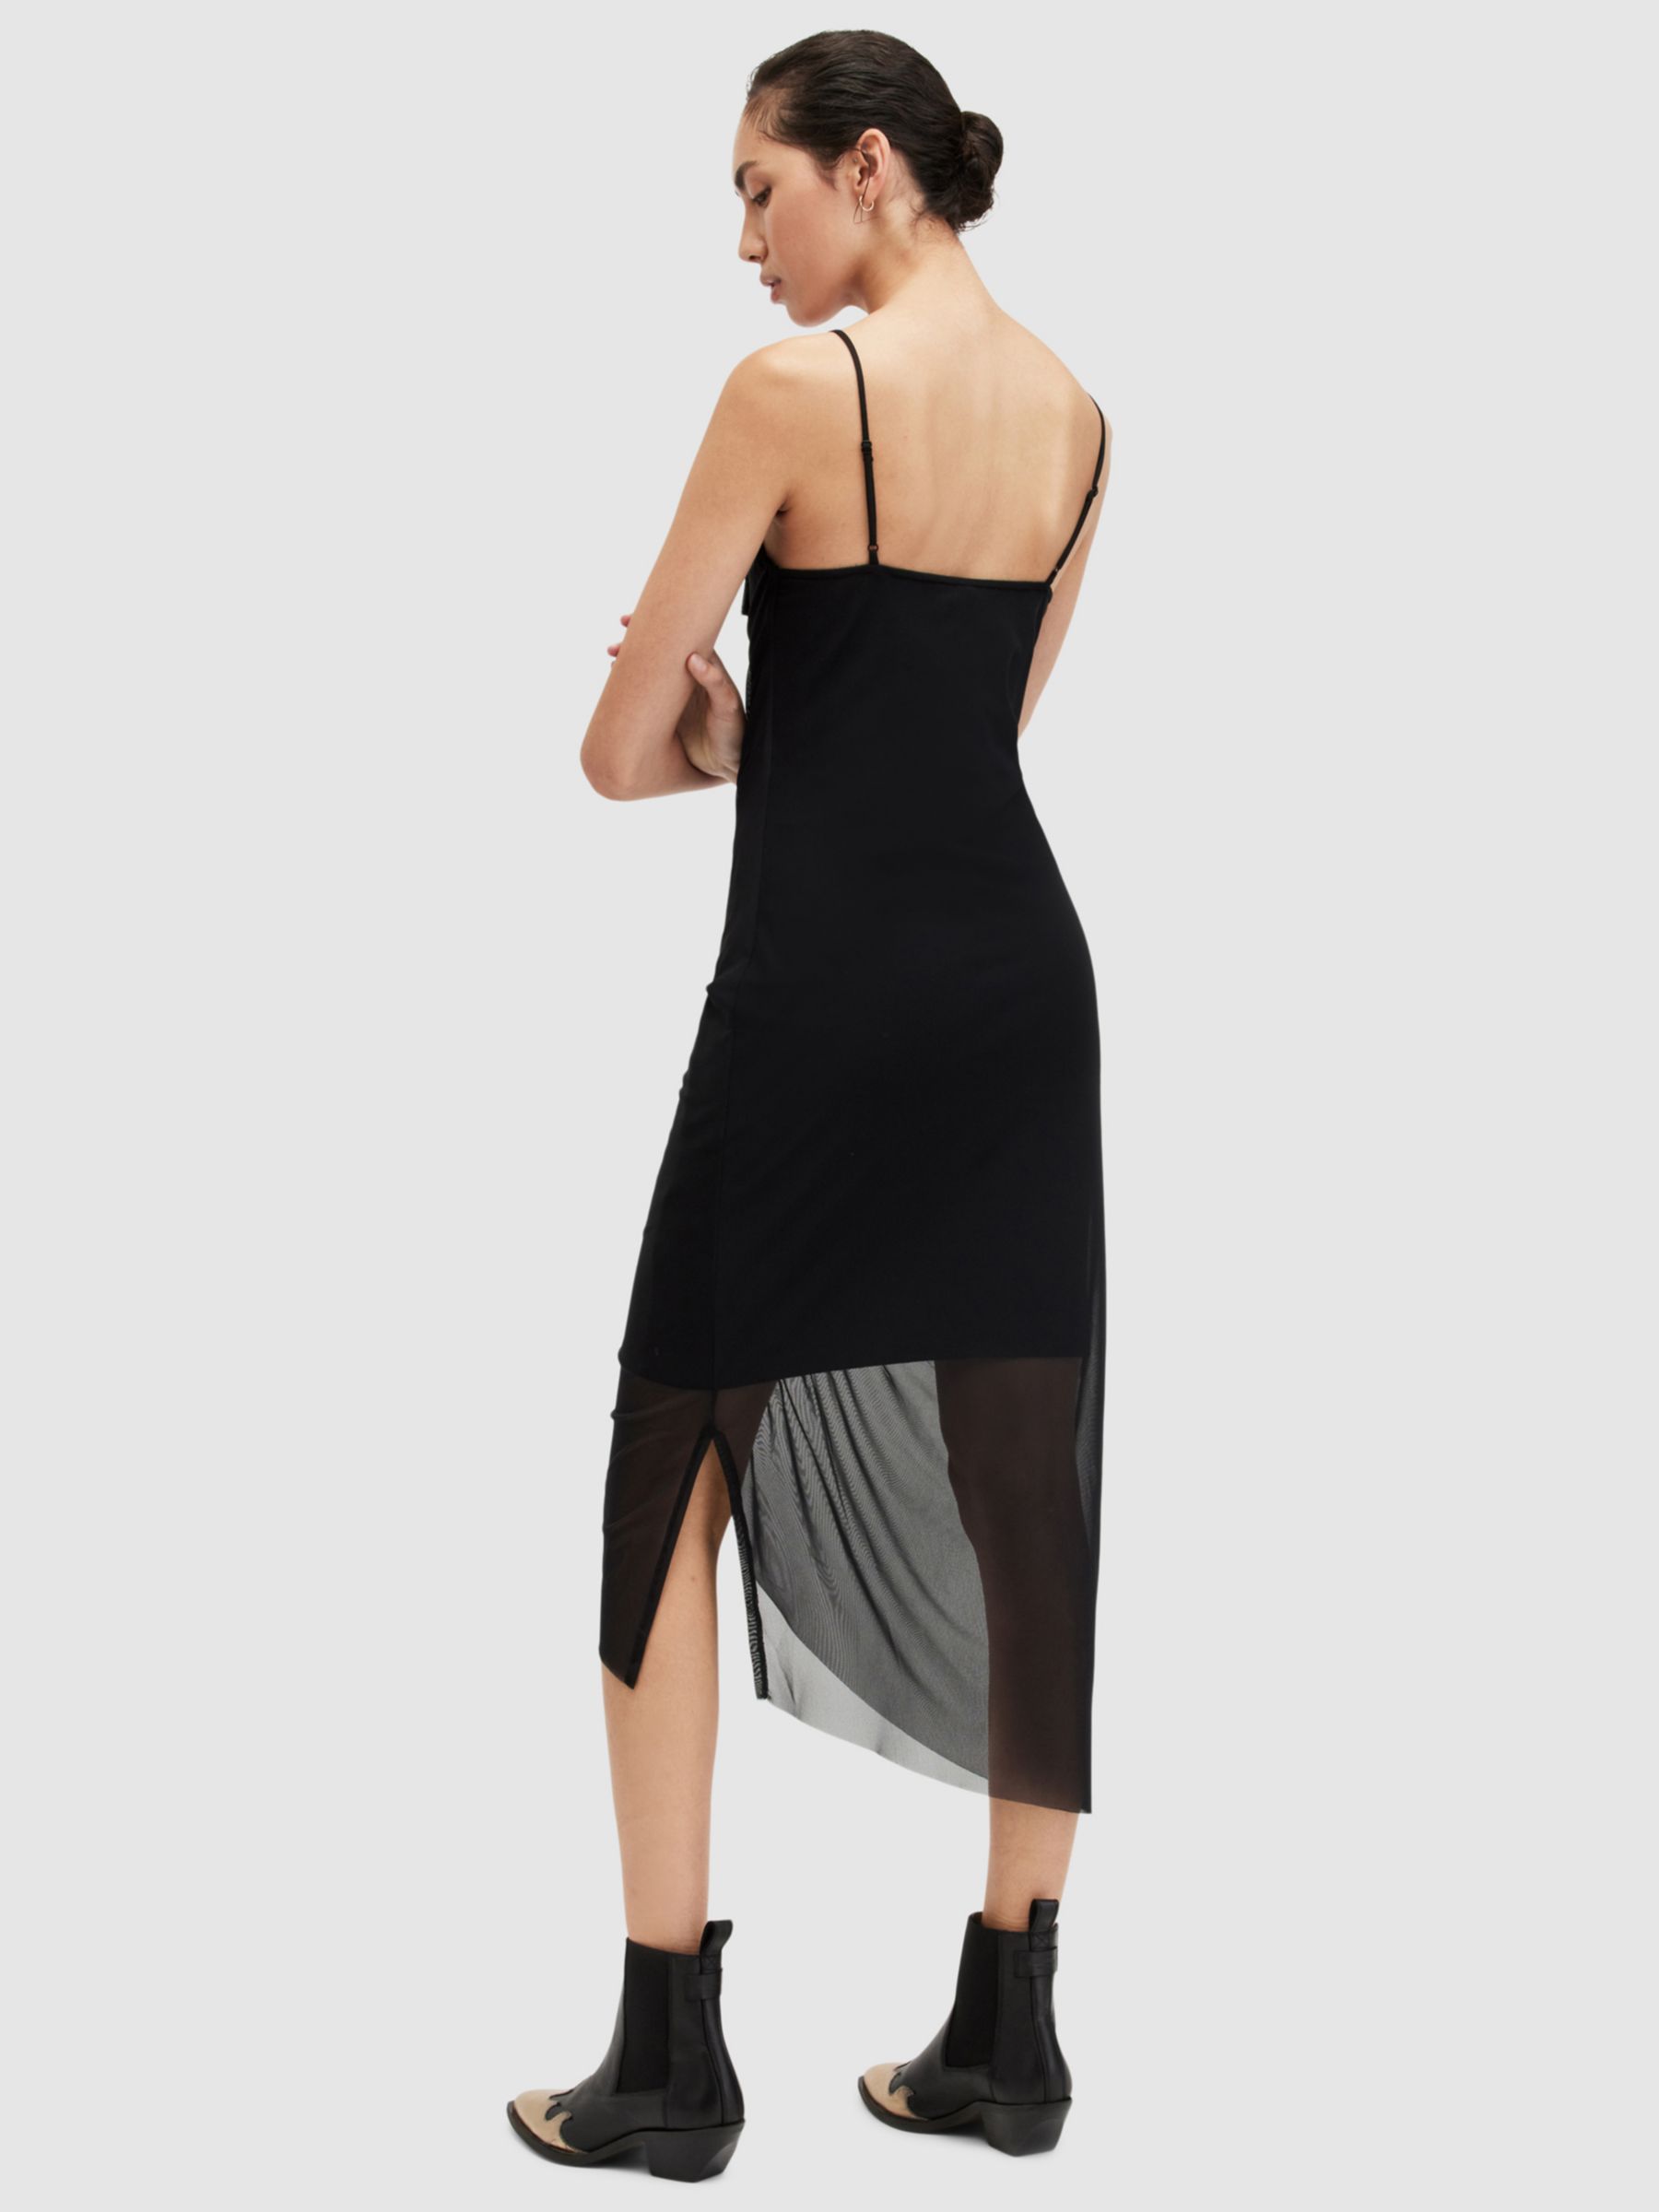 Buy AllSaints Ulla Ruched Bodycon Midi Dress Online at johnlewis.com